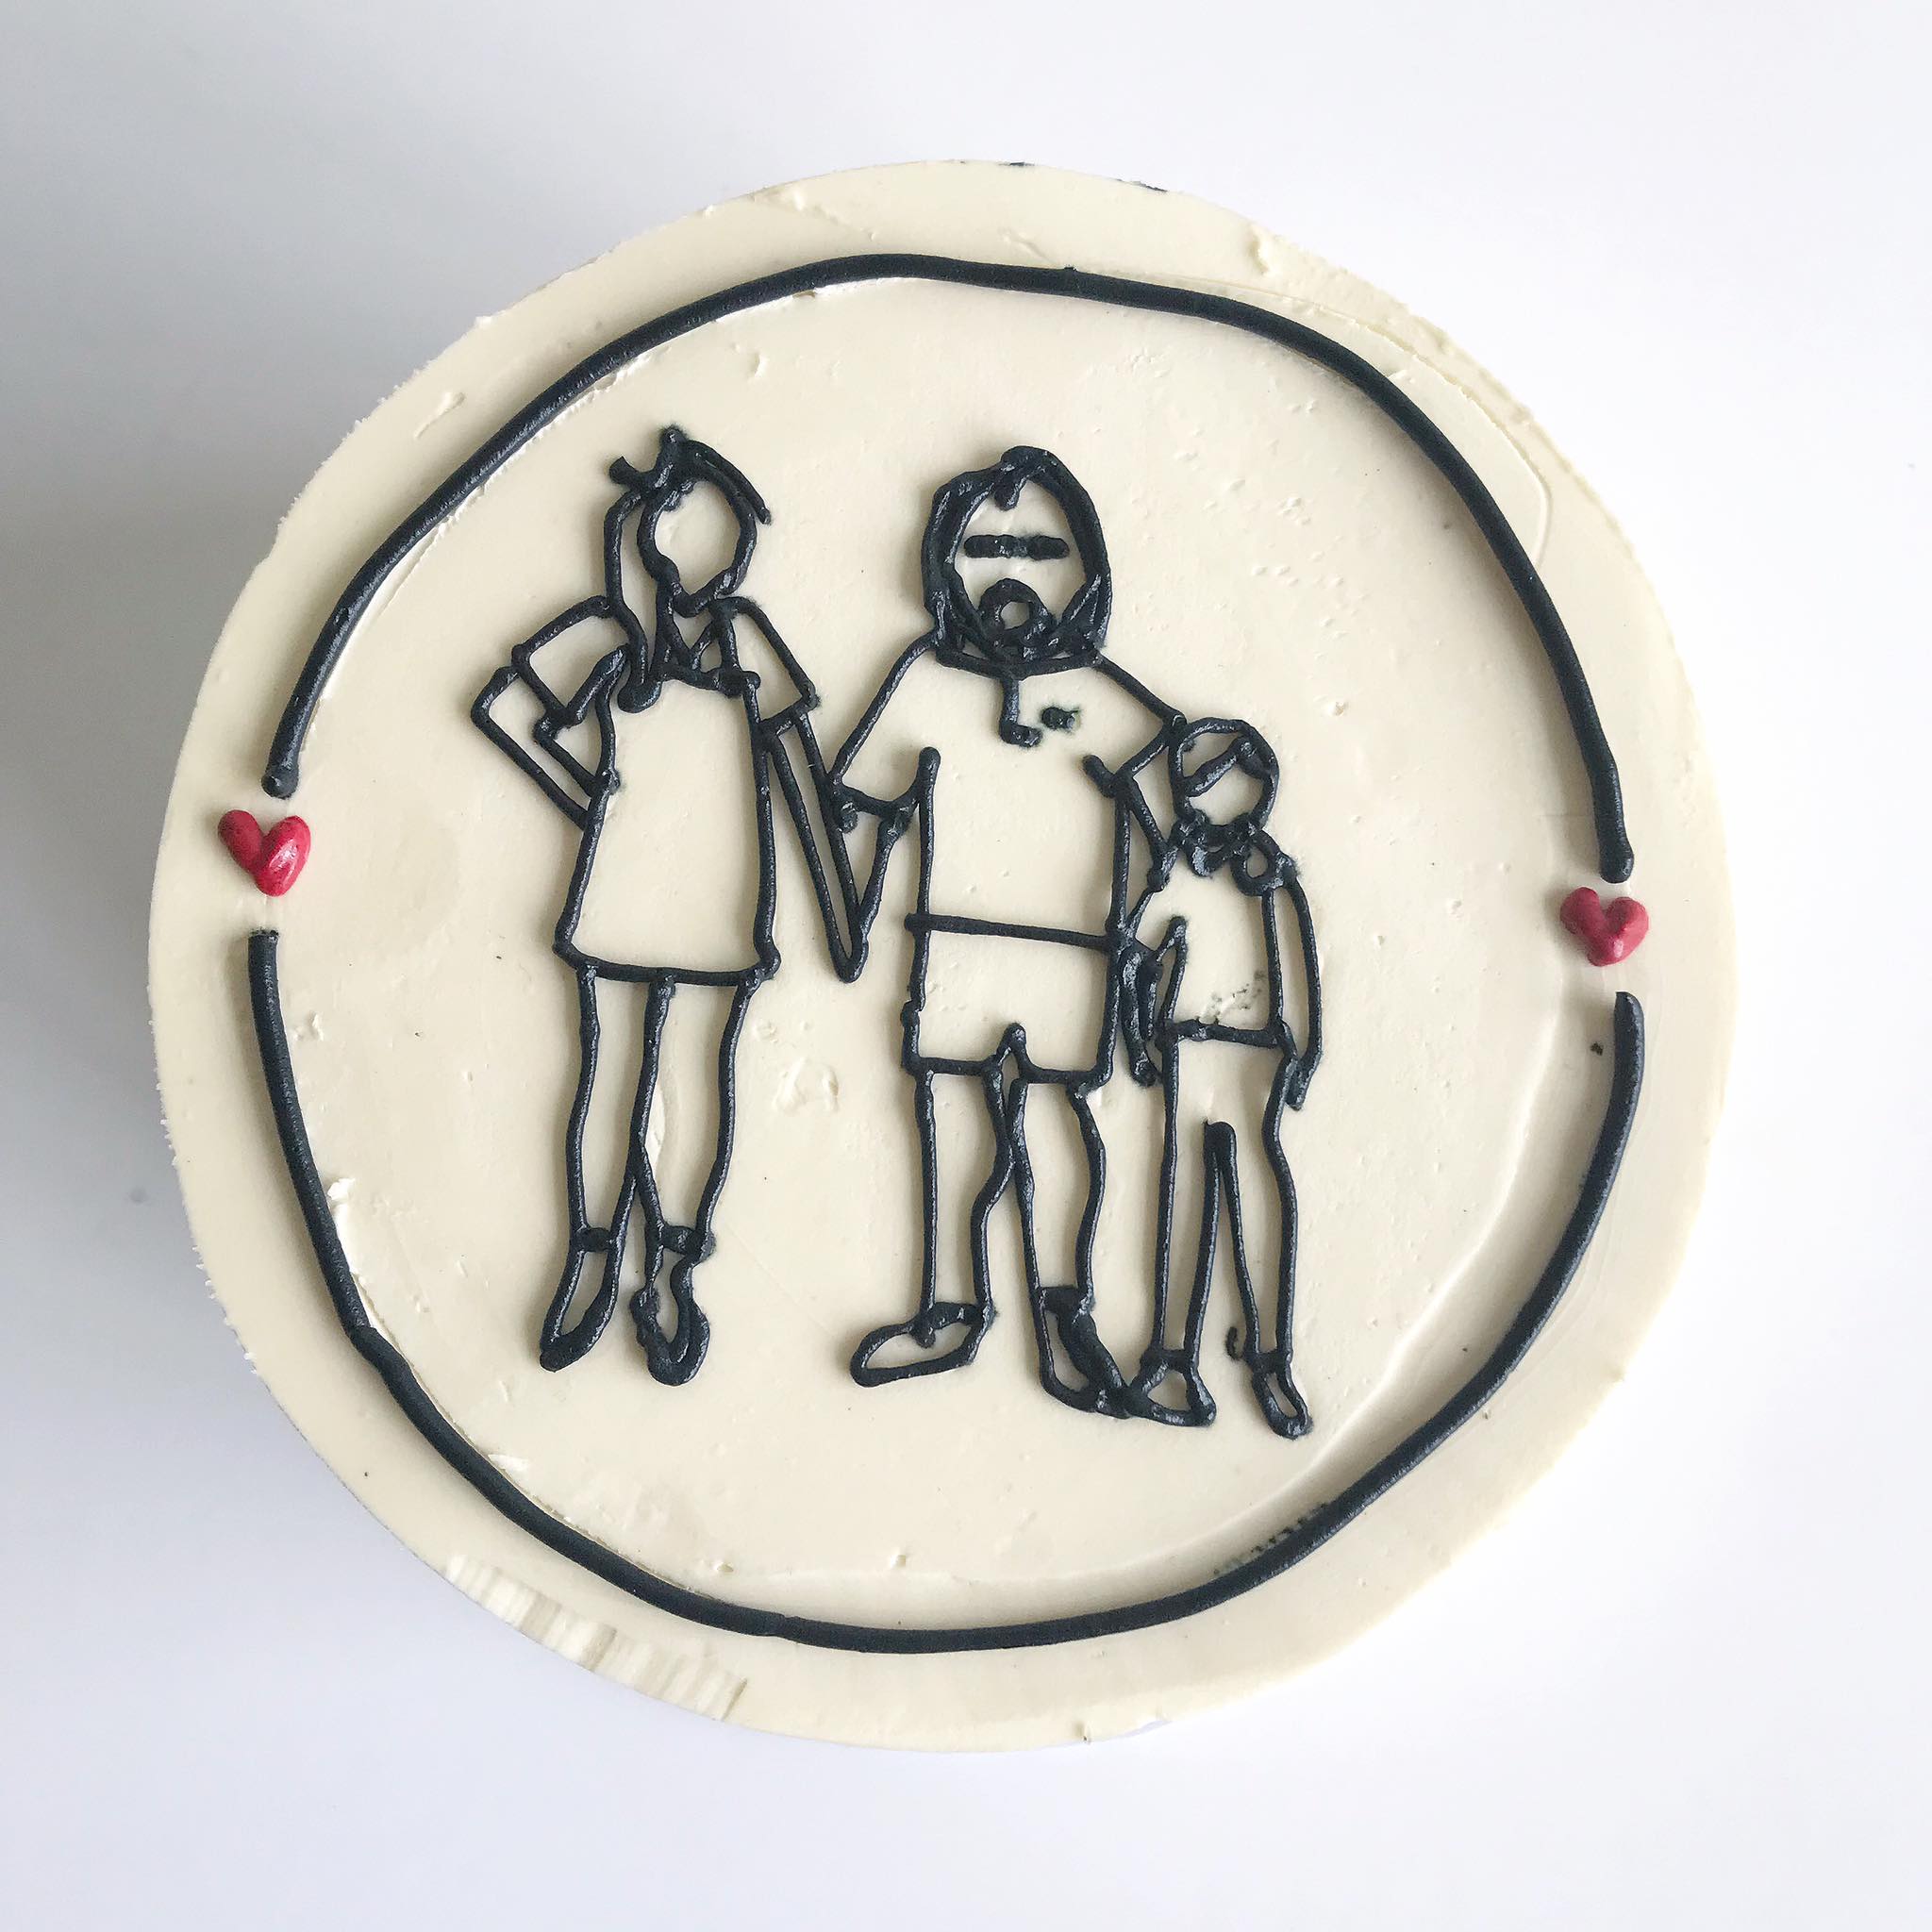 Father's Day Cake, The Cake Eating Co, Christchurch